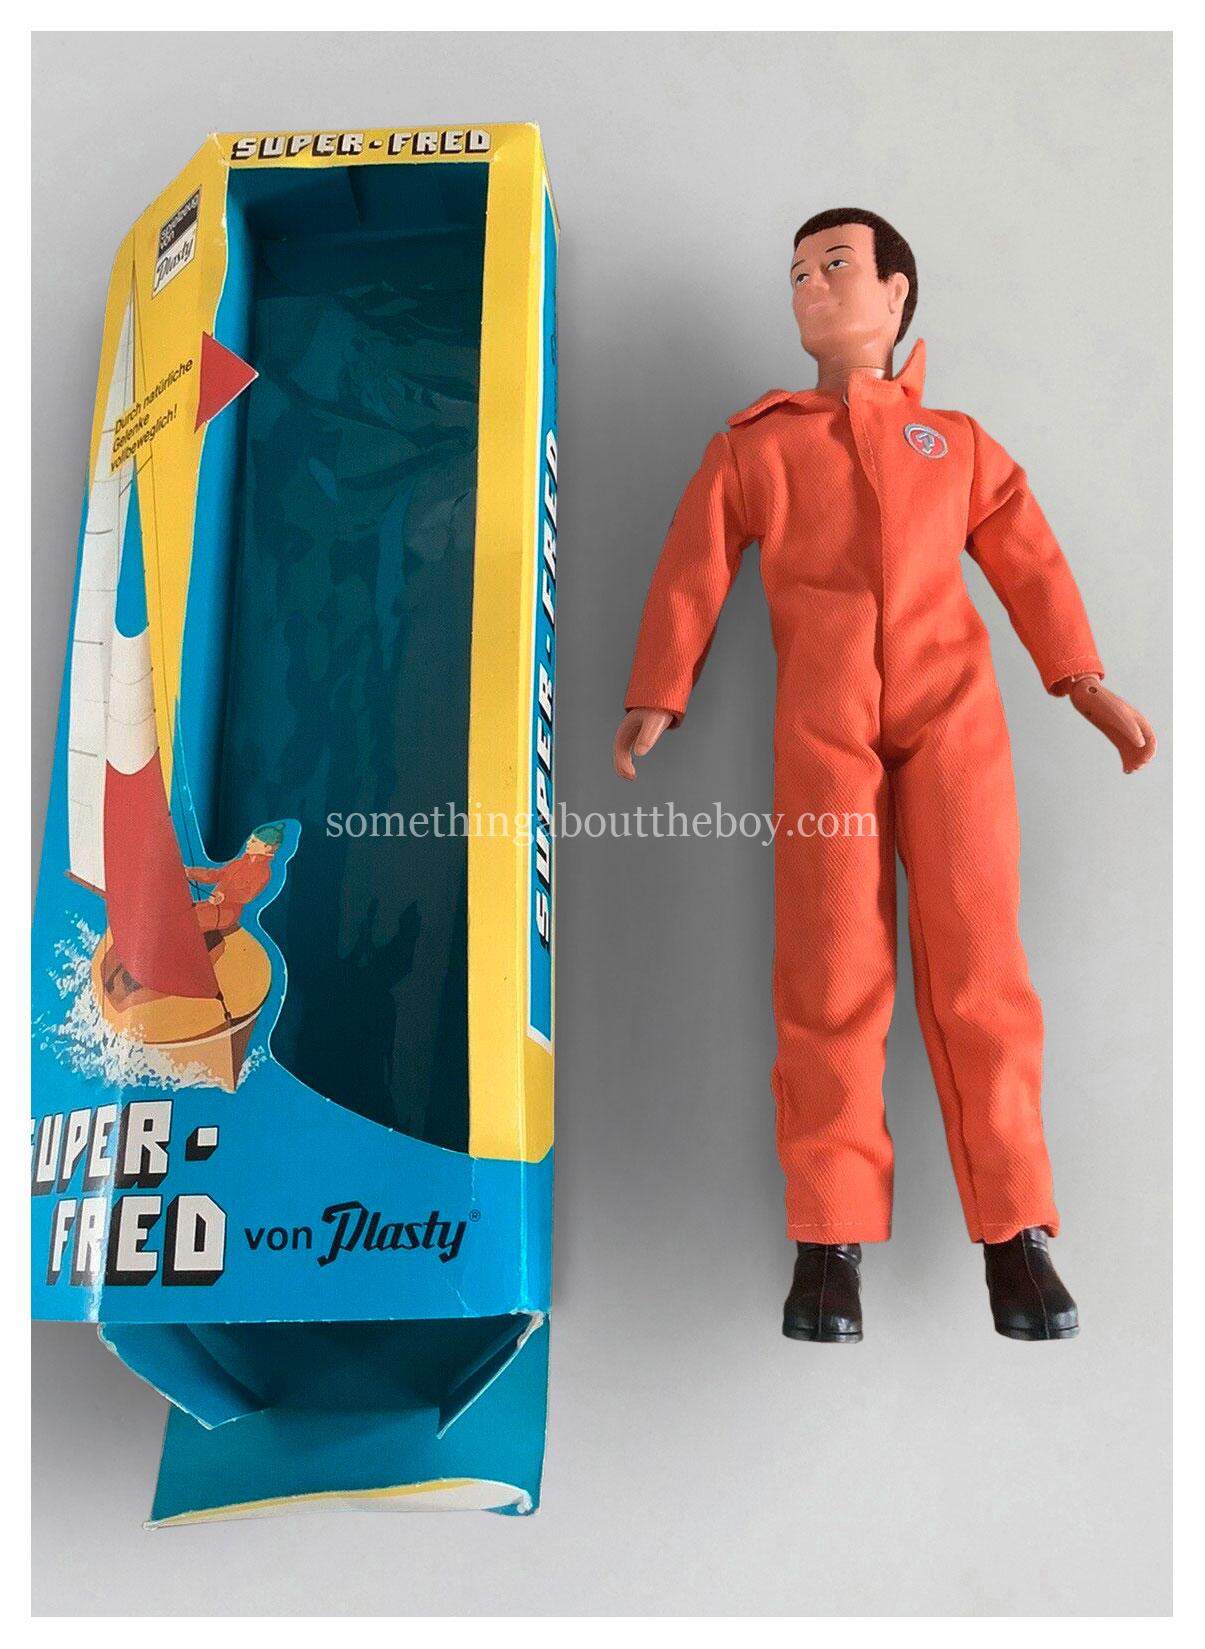 1976 #5796 Super Fred by Plasty